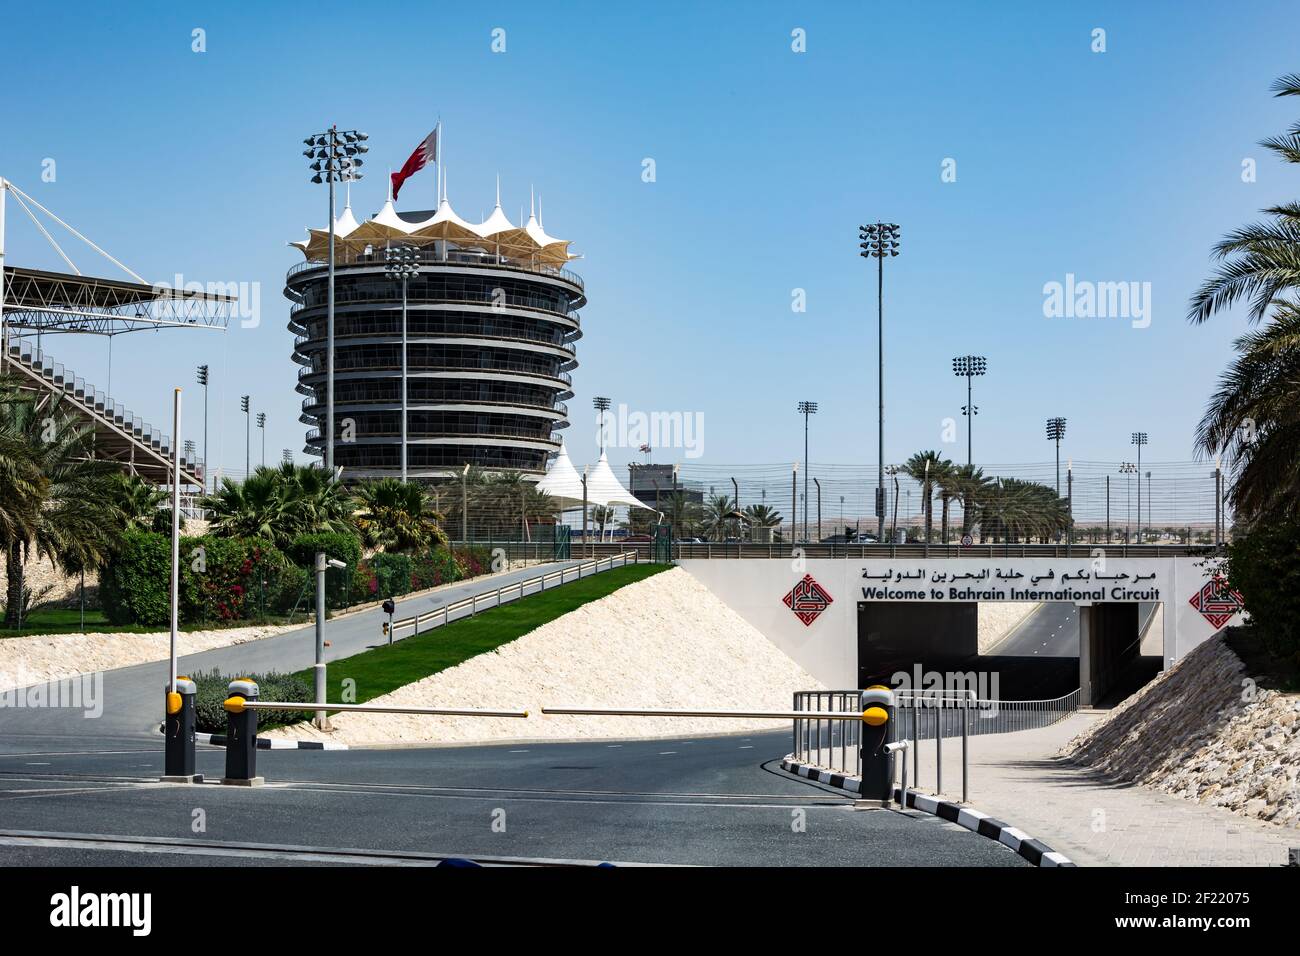 BAHRAIN, BAHRAIN - Mar 12, 2017: A view of the racetrack in Bahrain under blue skies and the heat of the desert. Stock Photo